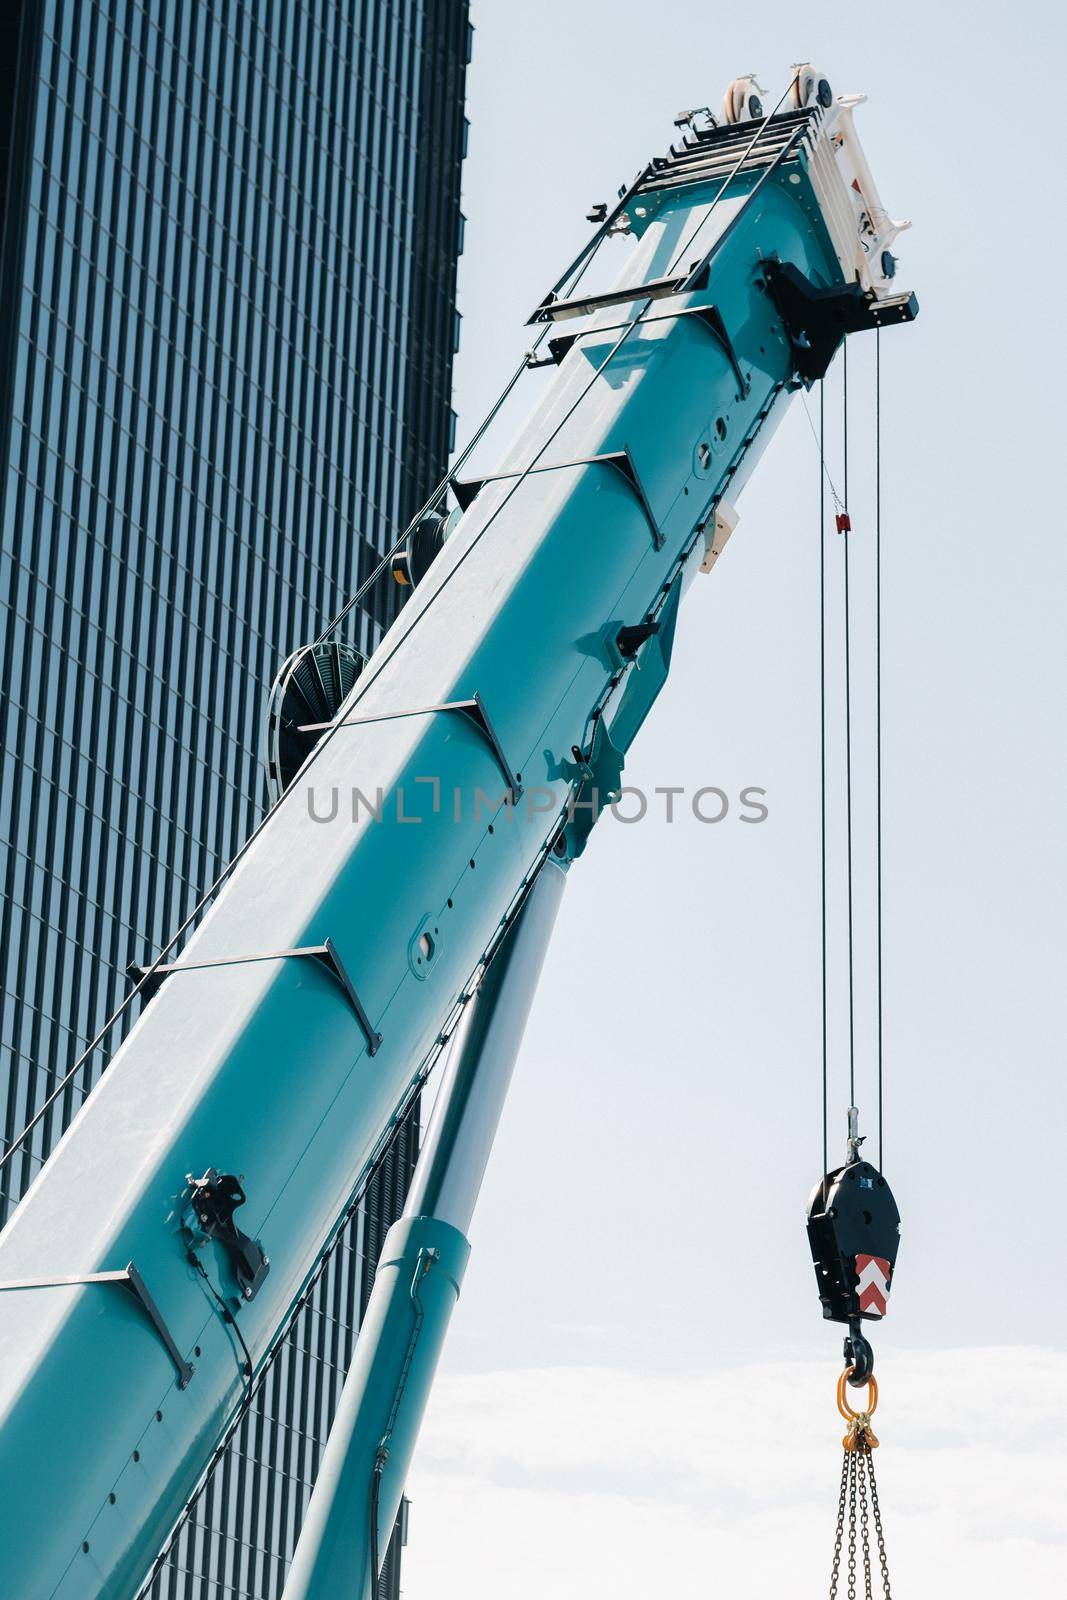 blue crane lifting mechanism with hooks near the glass modern building, crane and hydraulic high lift up to 120 meters.